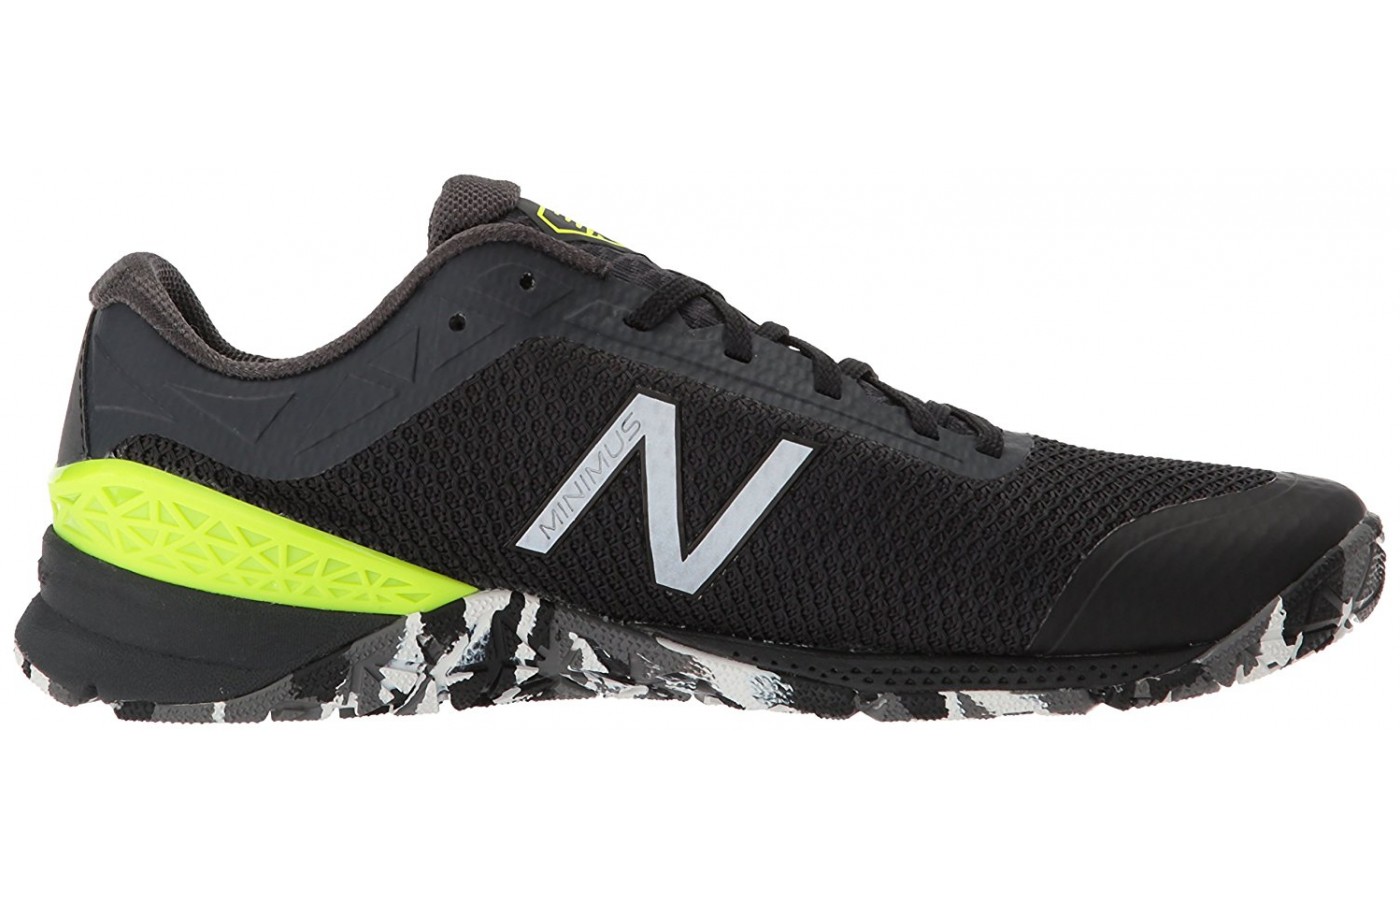 New Balance Minimus 40 Review in 2020 